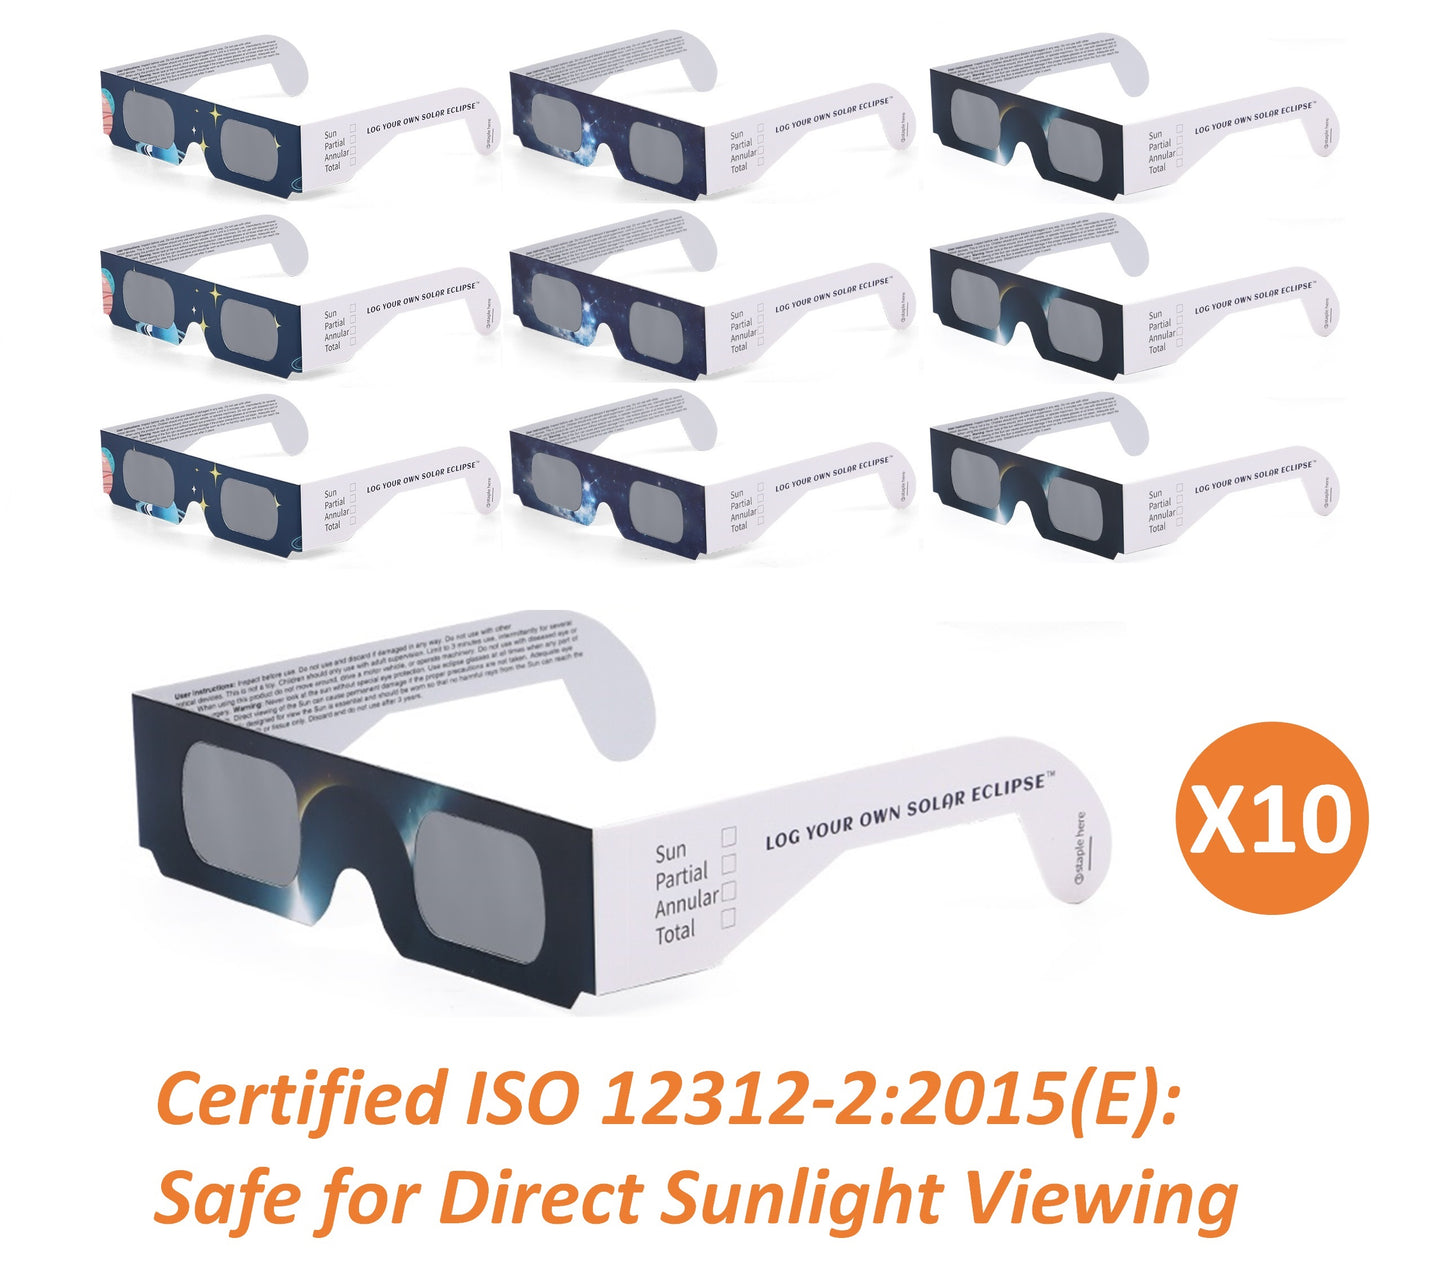 10 Pack - Log Your Own Solar Eclipse Glasses - Patent Pending - ISO Certified - Mixed Patterns